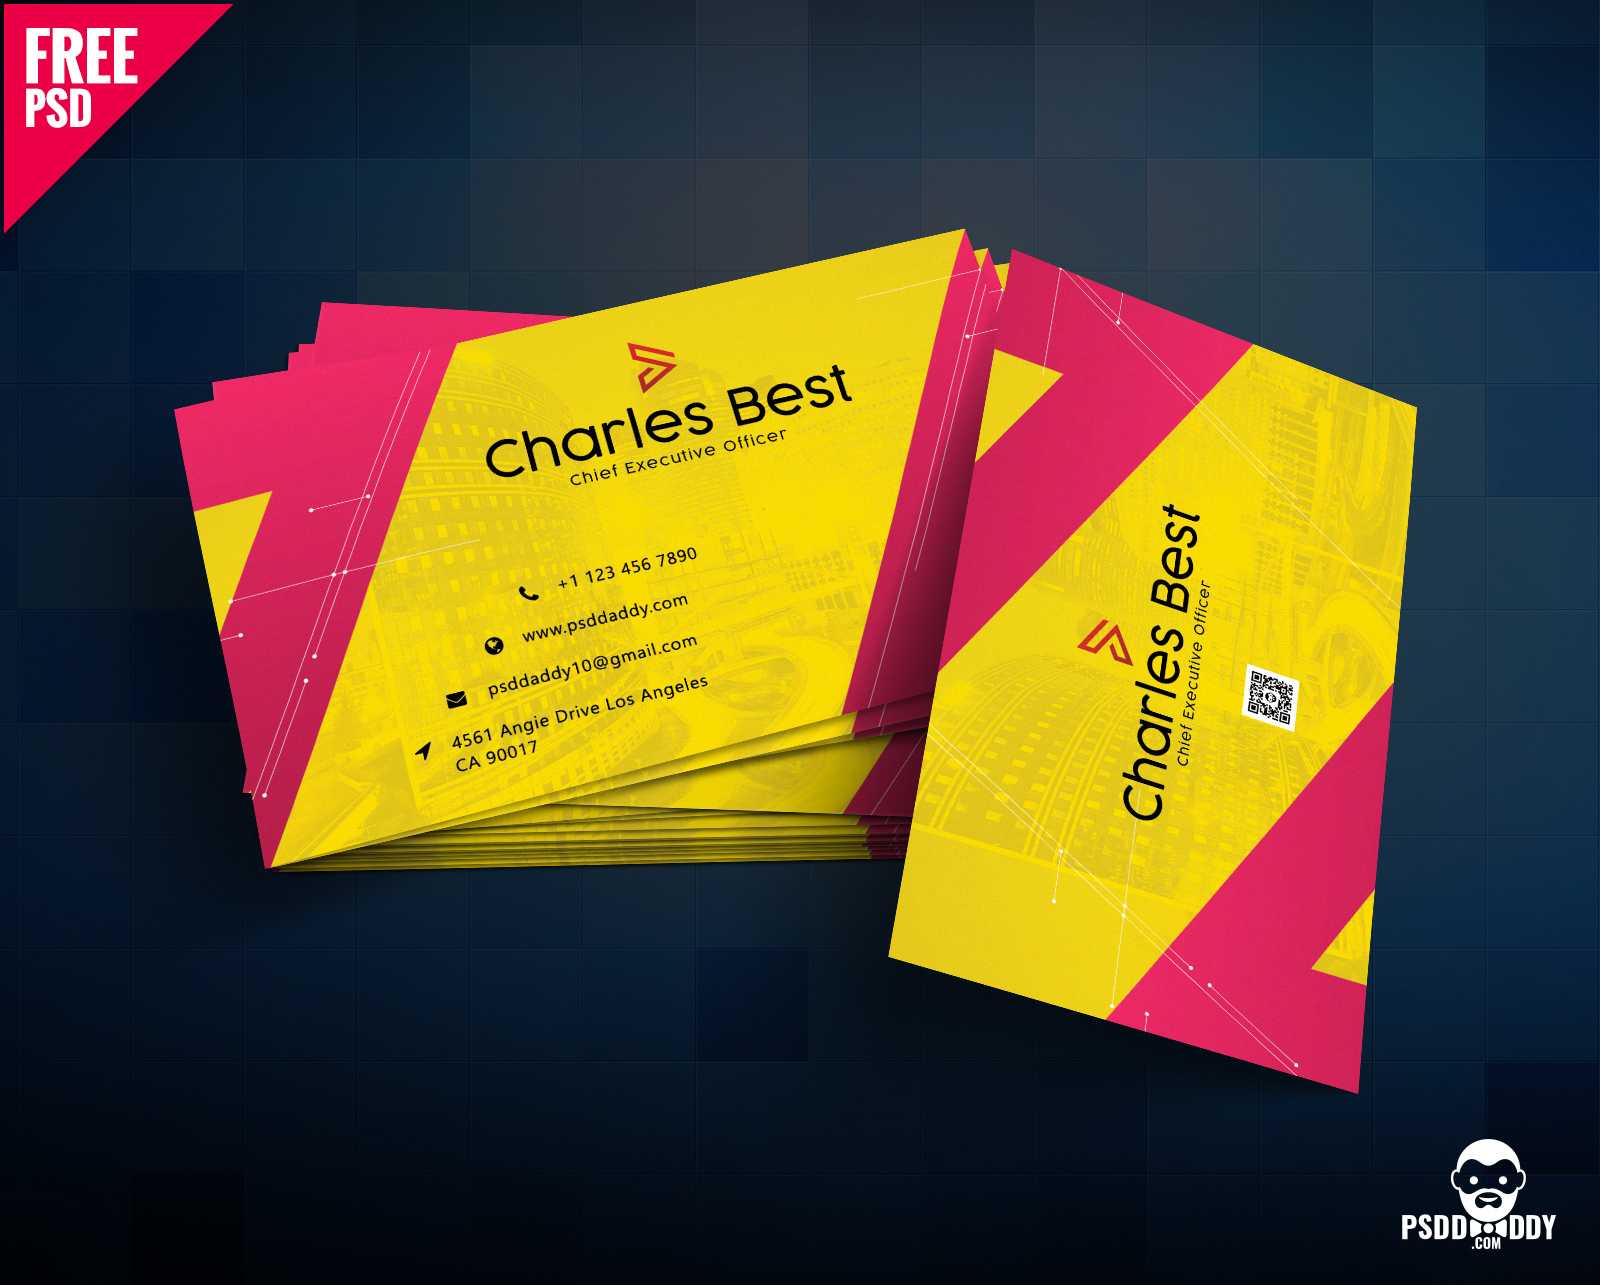 Download] Creative Business Card Free Psd | Psddaddy Within Iphone Business Card Template